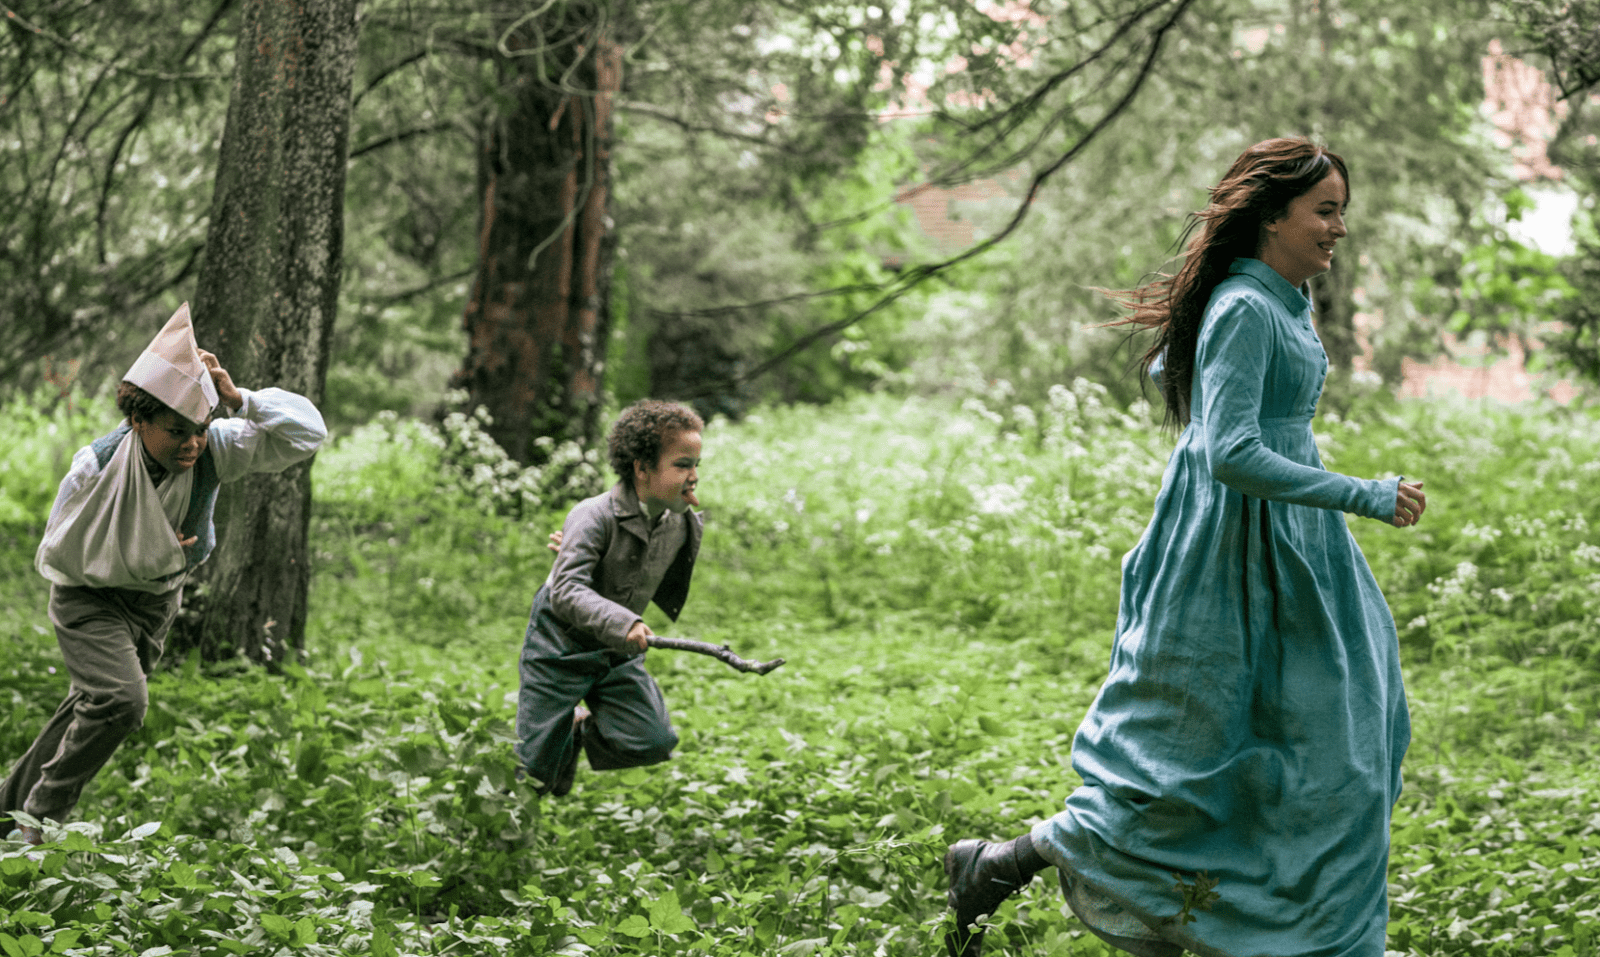 A woman wearing a long, green dress playing with two young kids in a forest